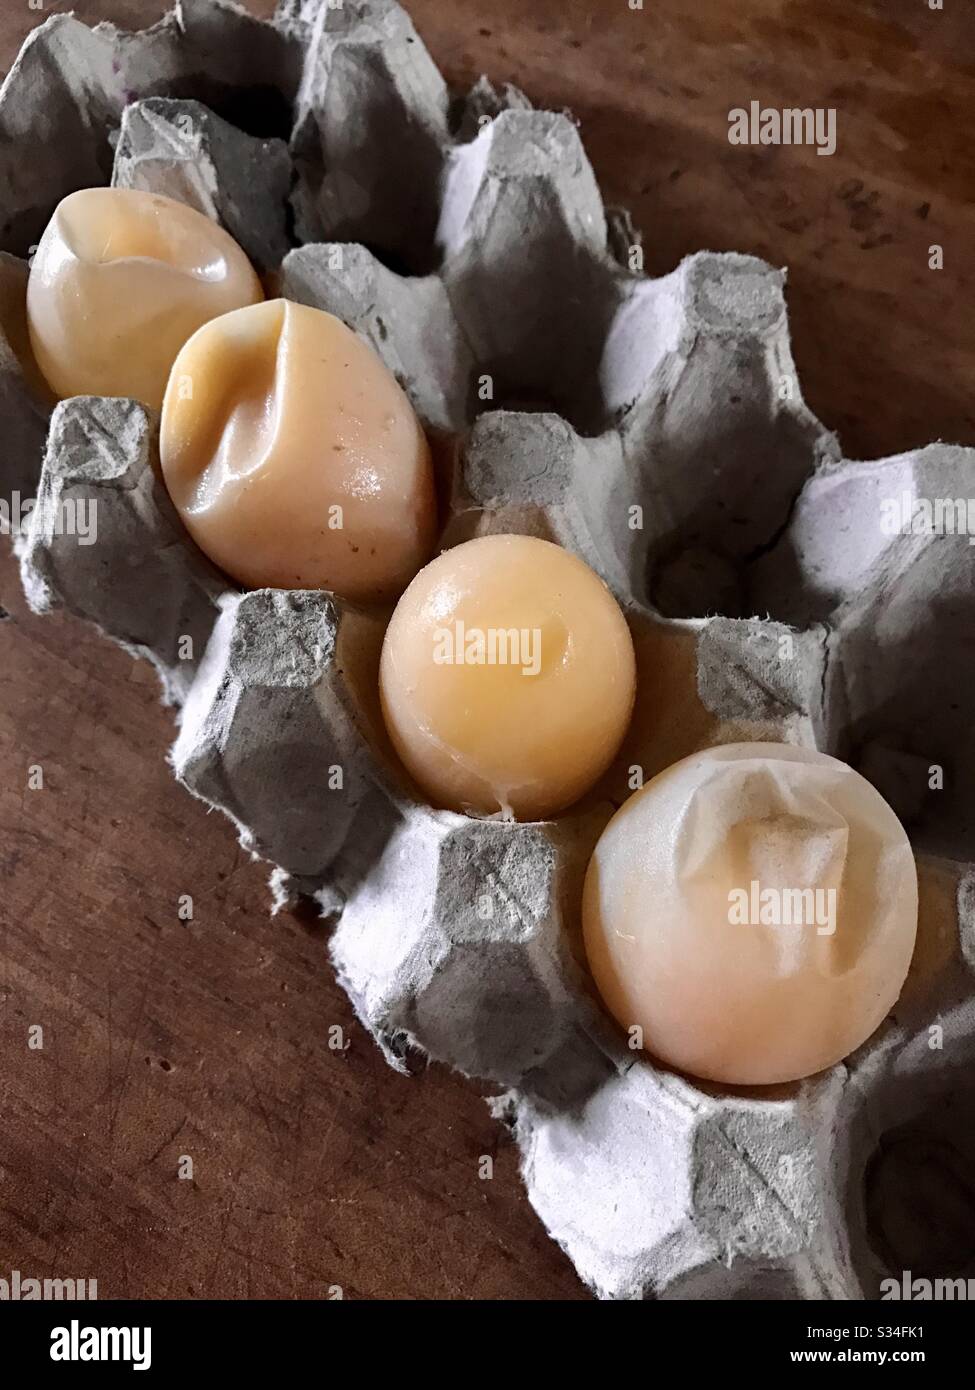 Eggs without shells. Laid prematurely by chickens that are shocked or grabbed by surprise. It also happens when chickens lack calcium. Egg white and yolk remains to have the same texture and flavor. Stock Photo